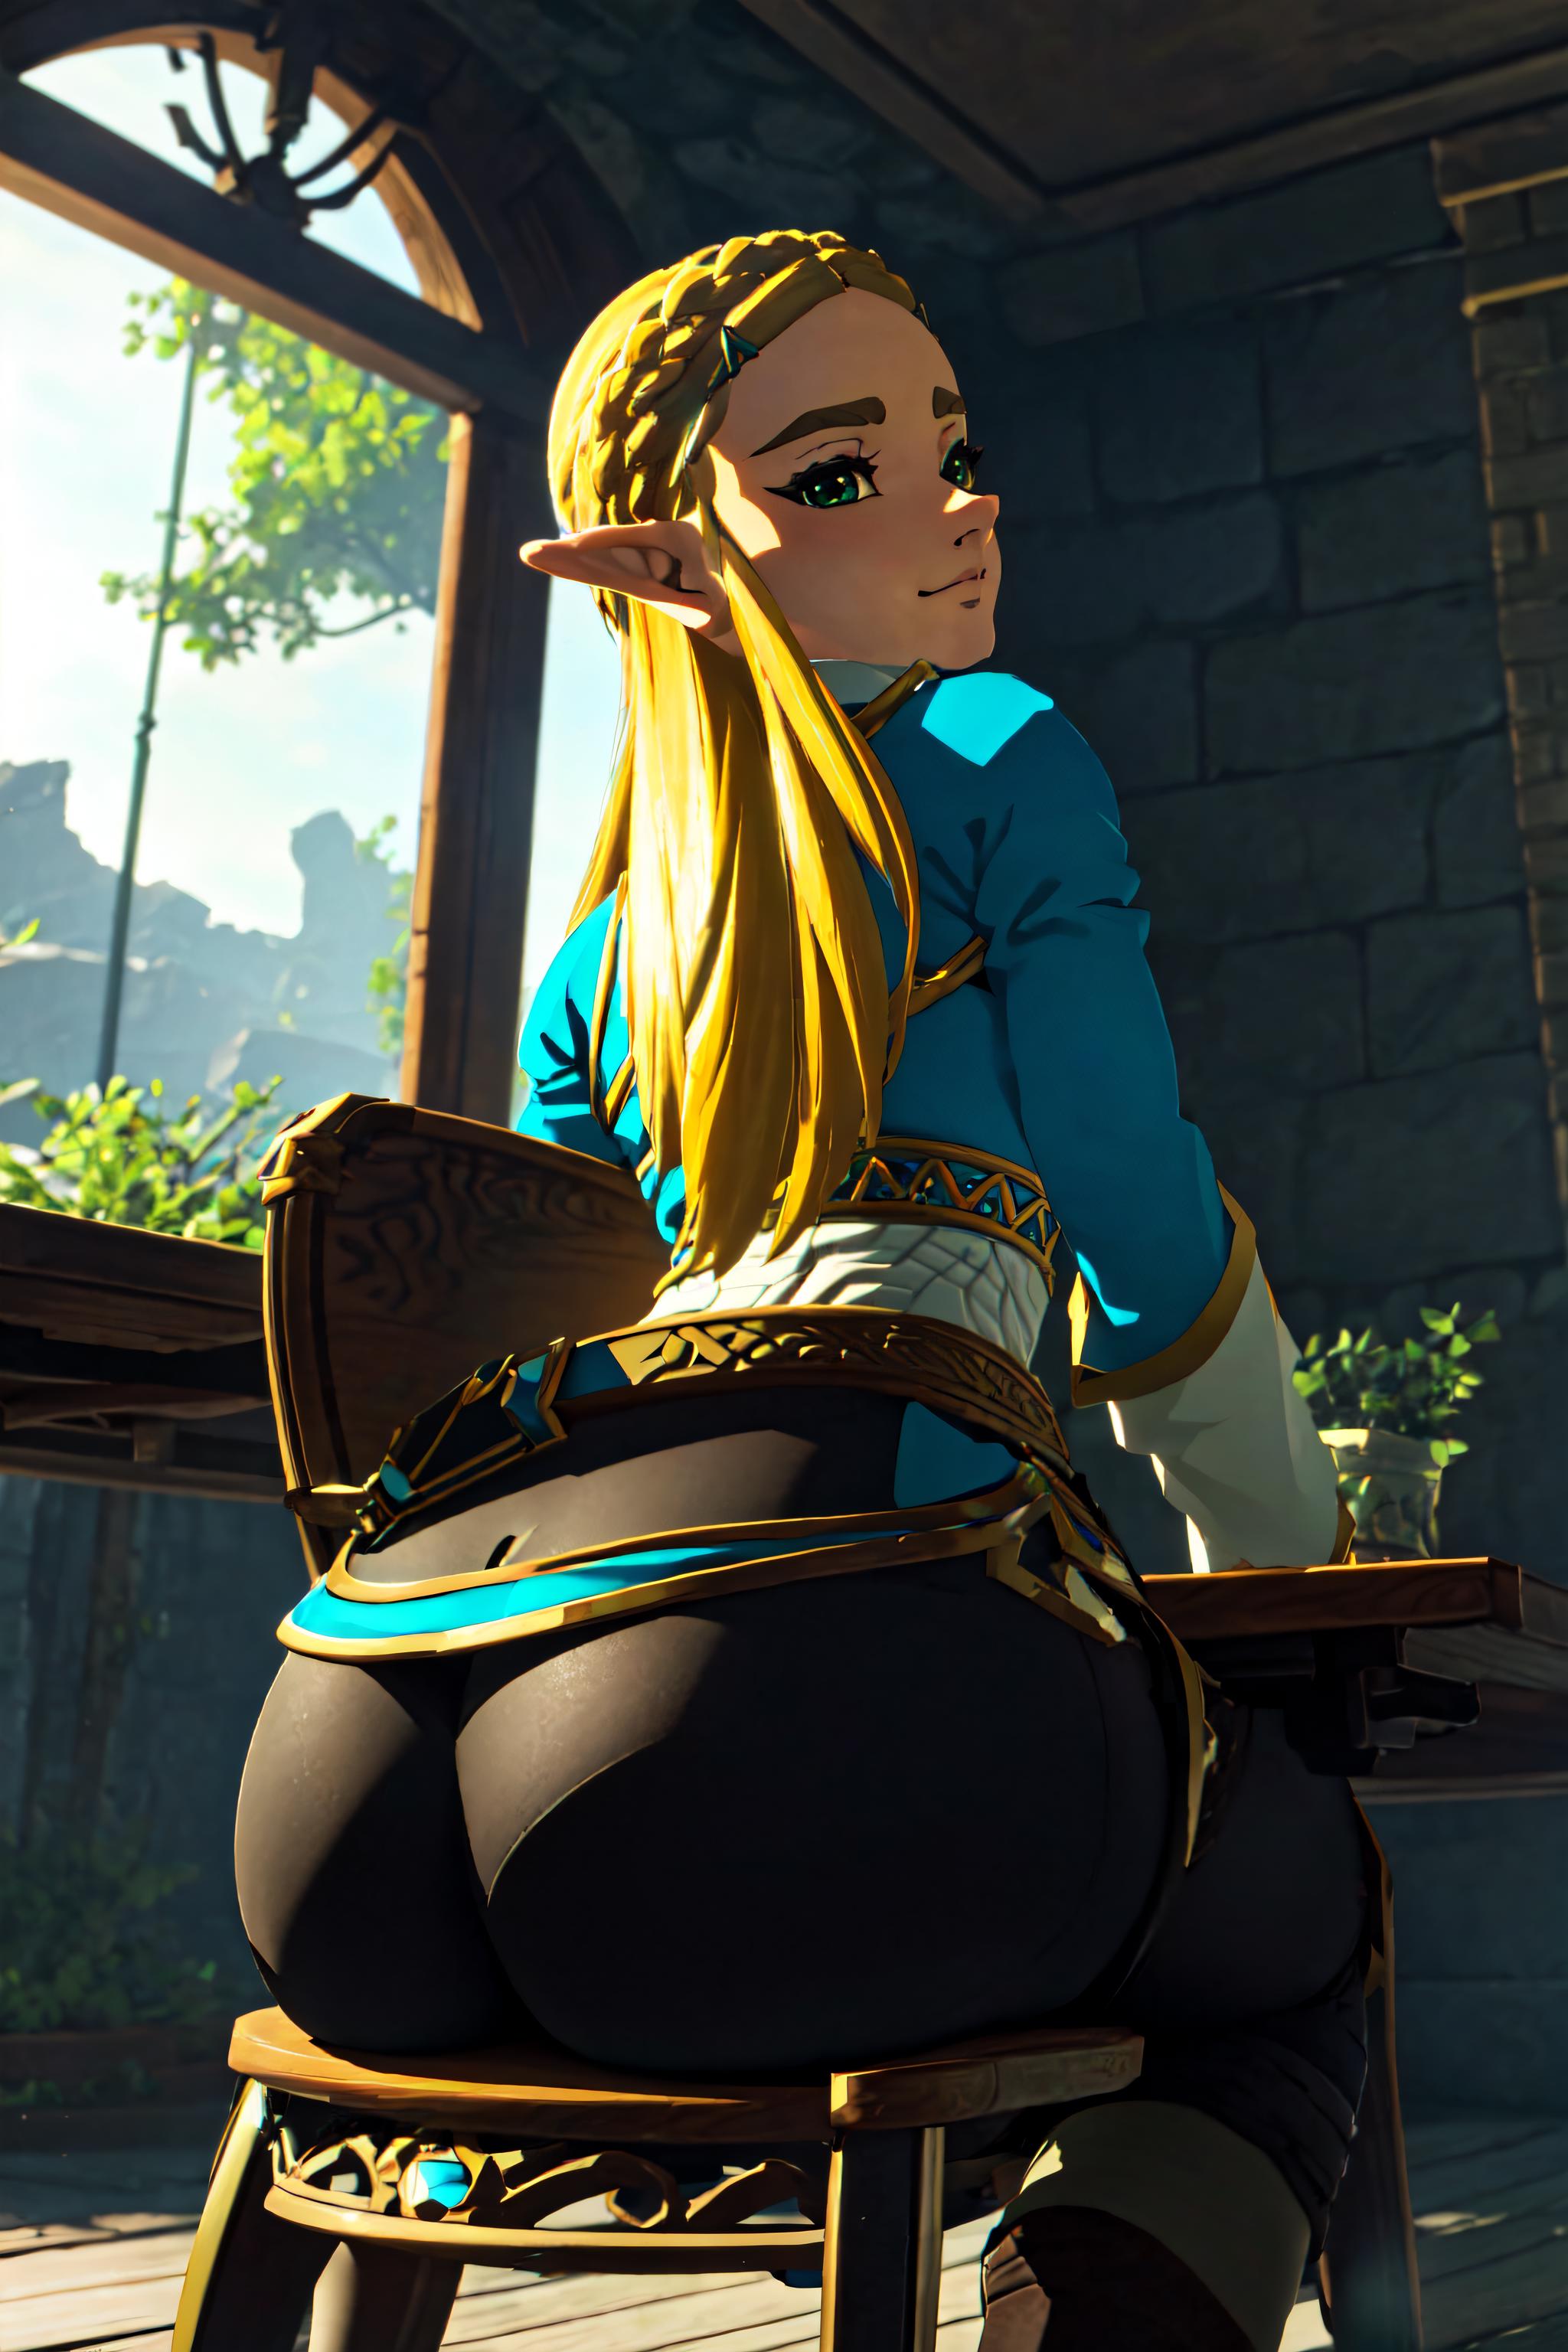 A video game character with a blue outfit, yellow hair, and a green bow in her hair.